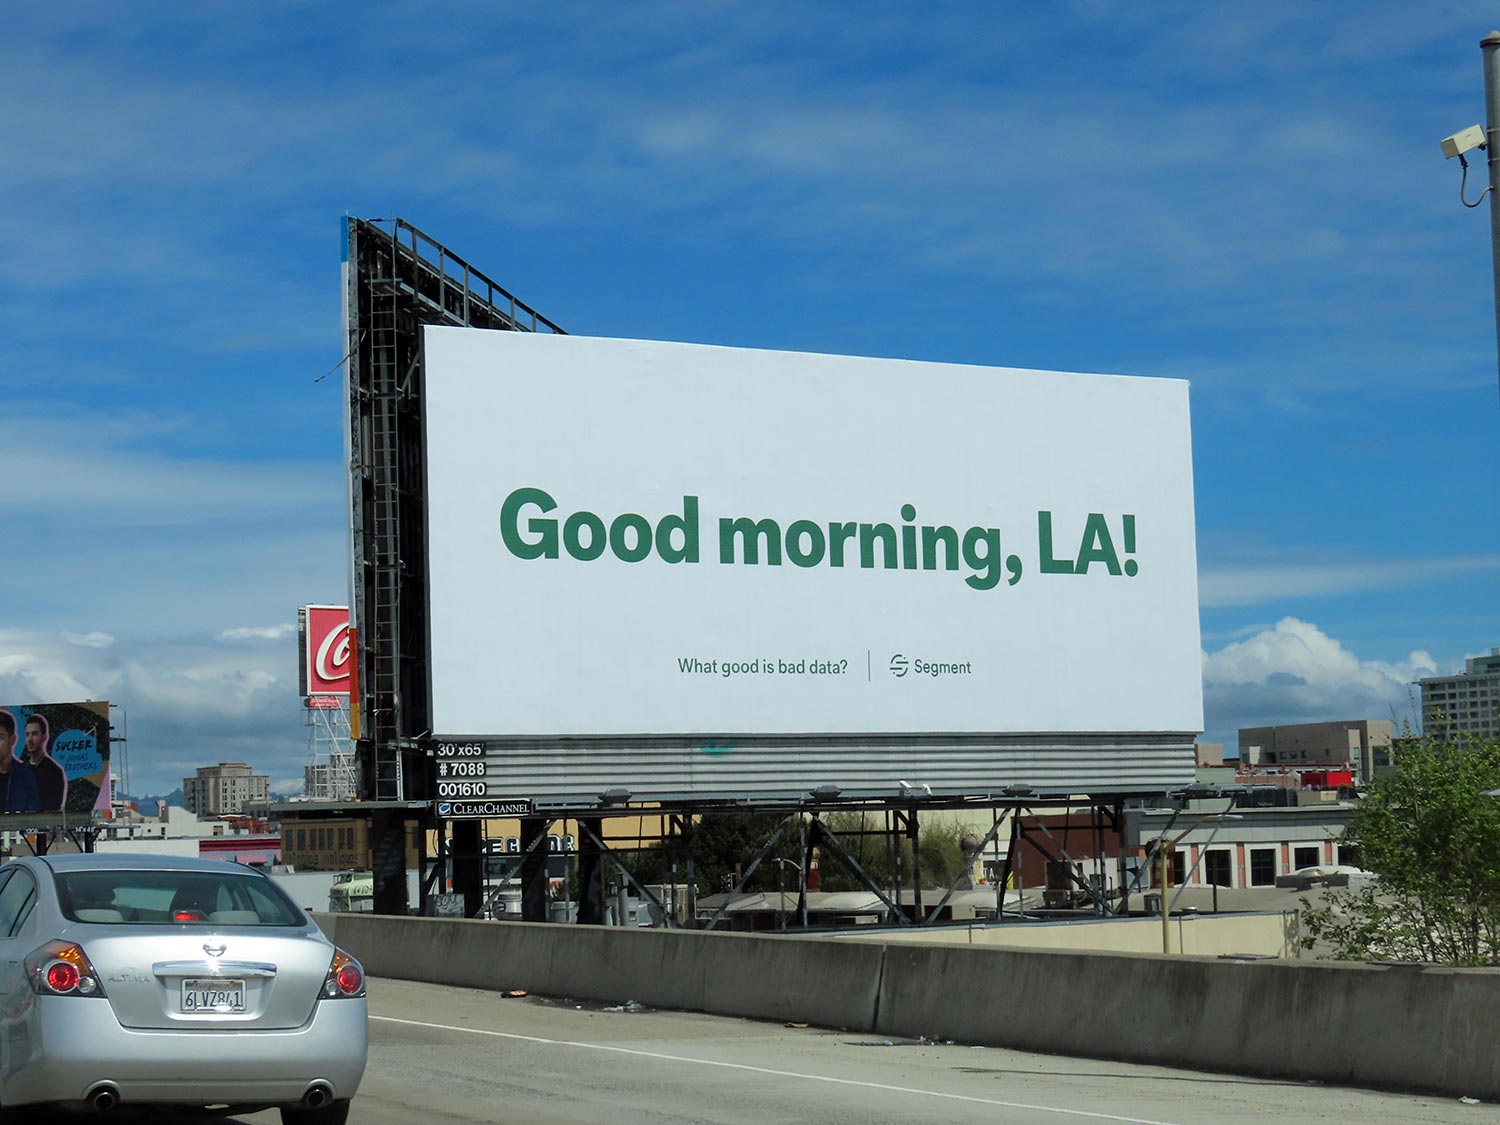 Data platform Segment shows a masterful command of effective startup marketing in this billboard and social media campaign